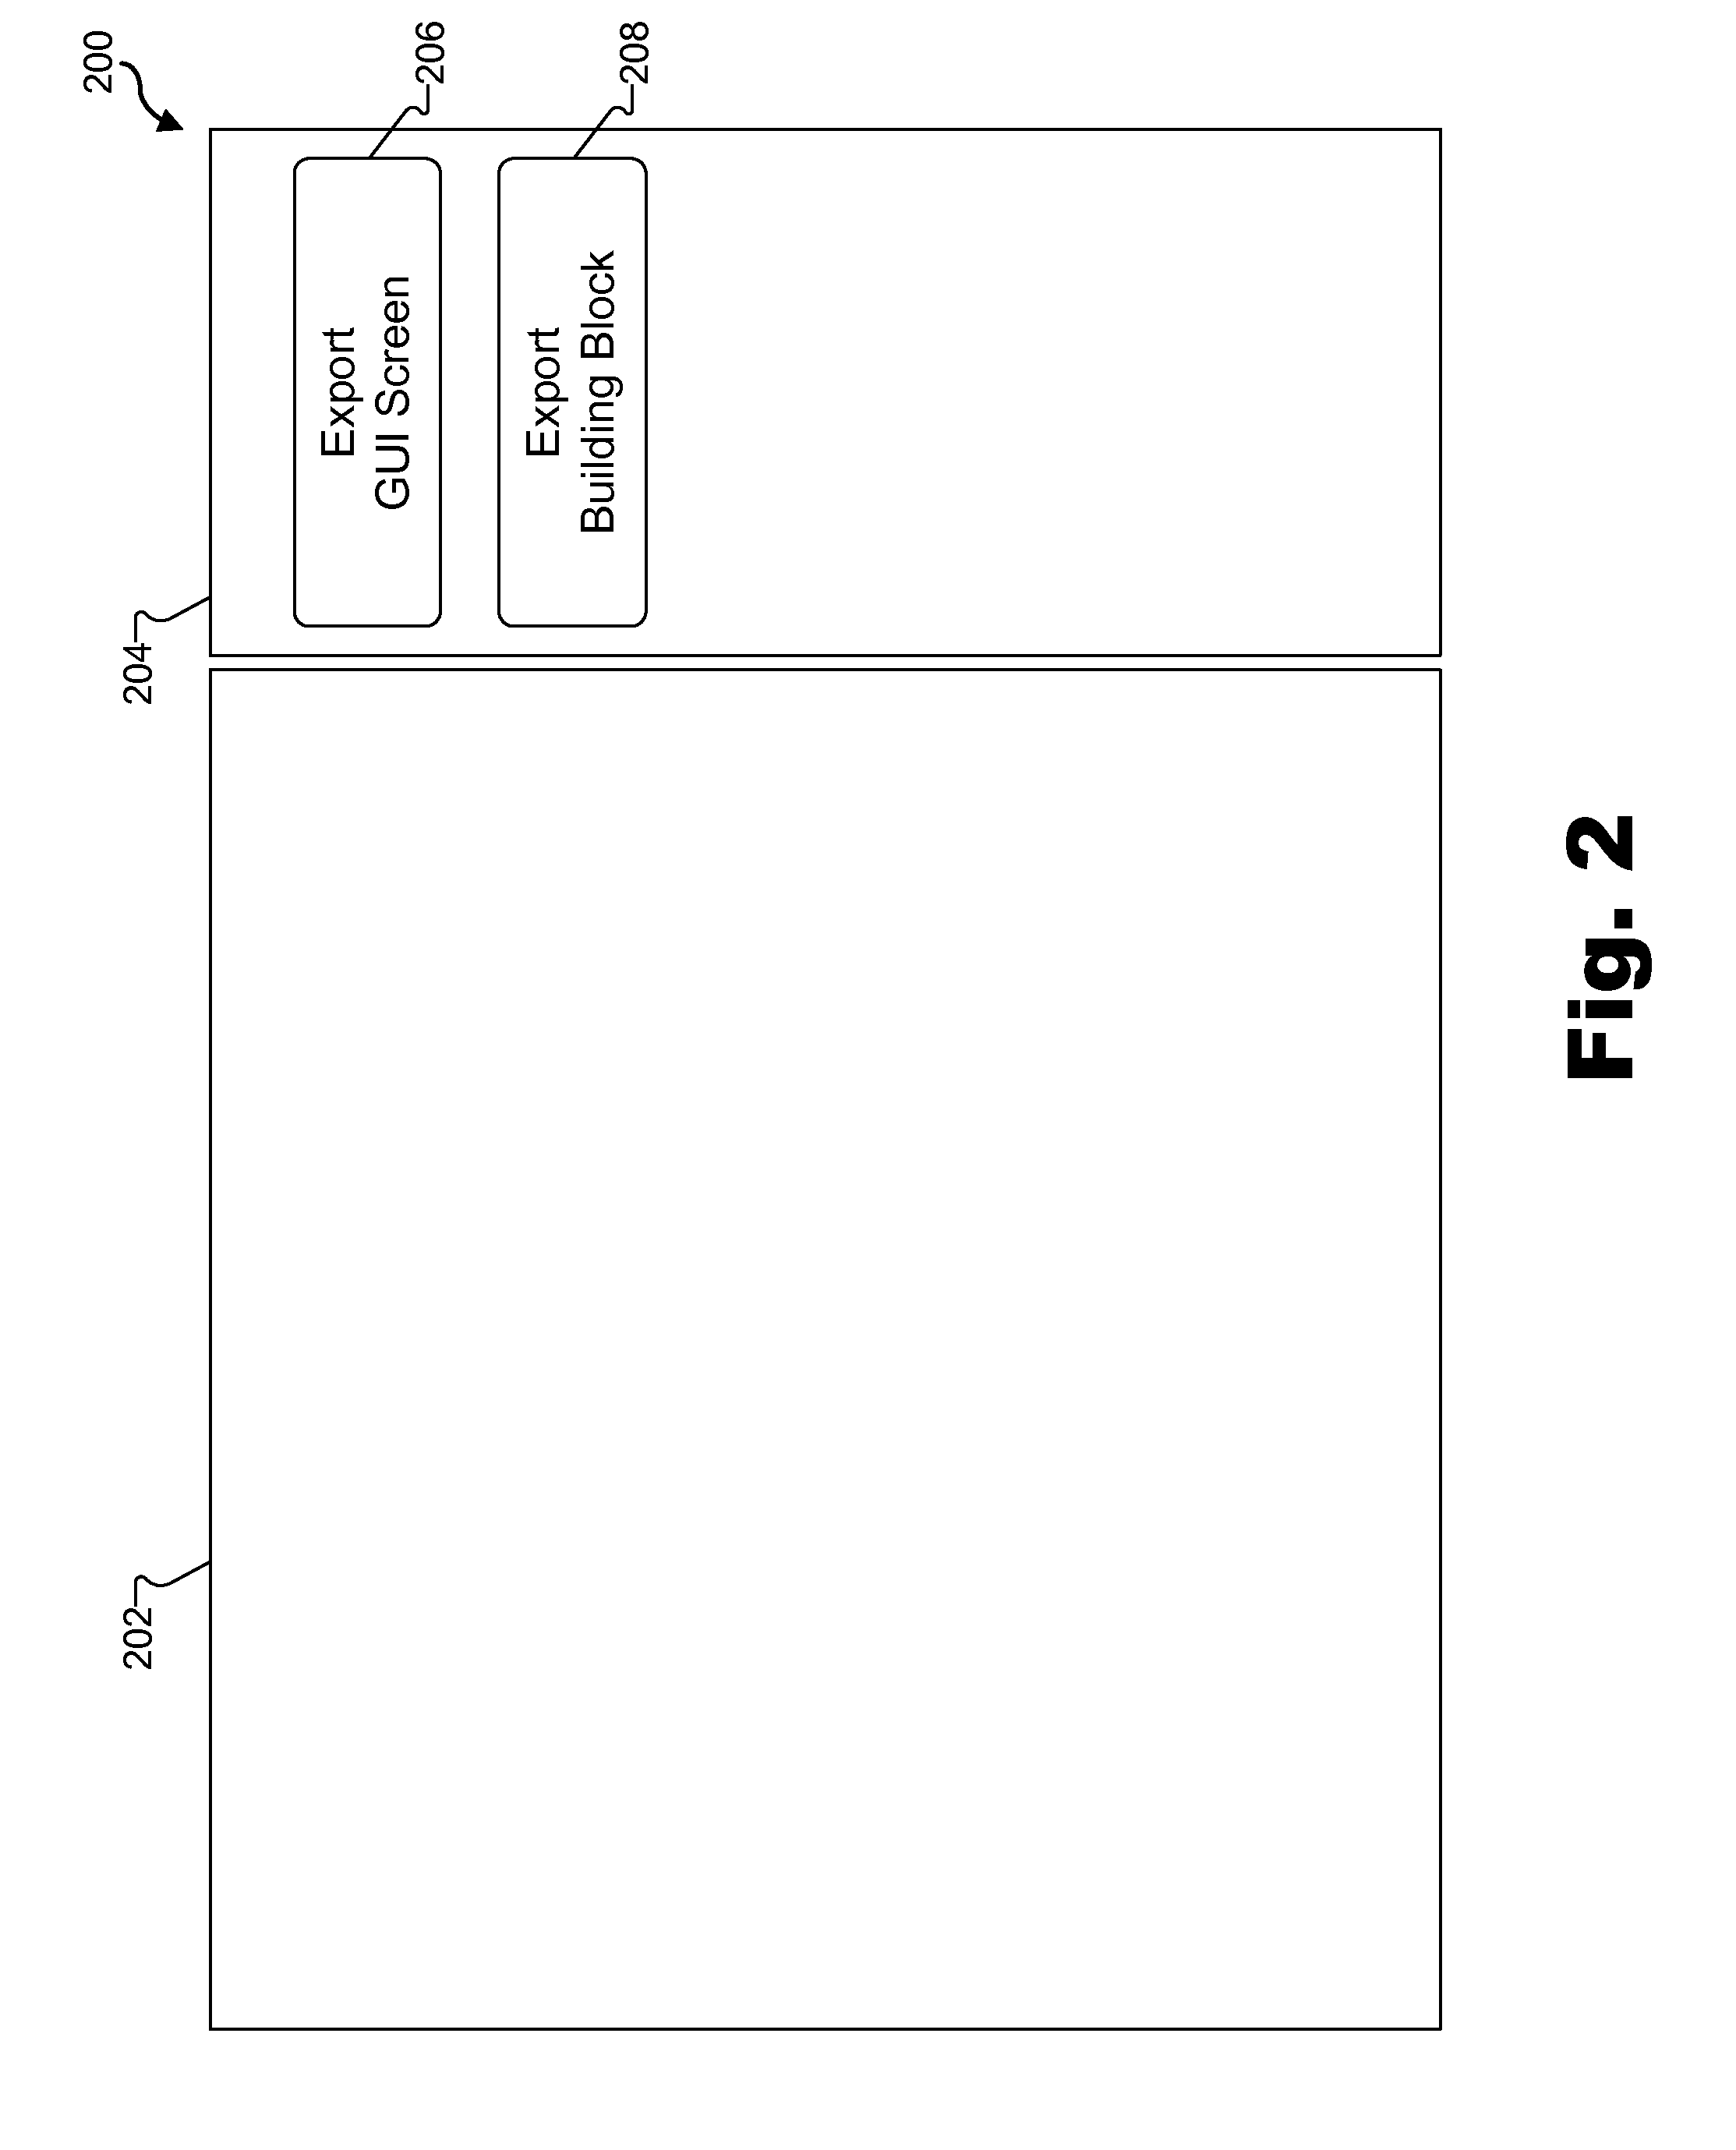 Building block based graphical user interface design and development systems and methods